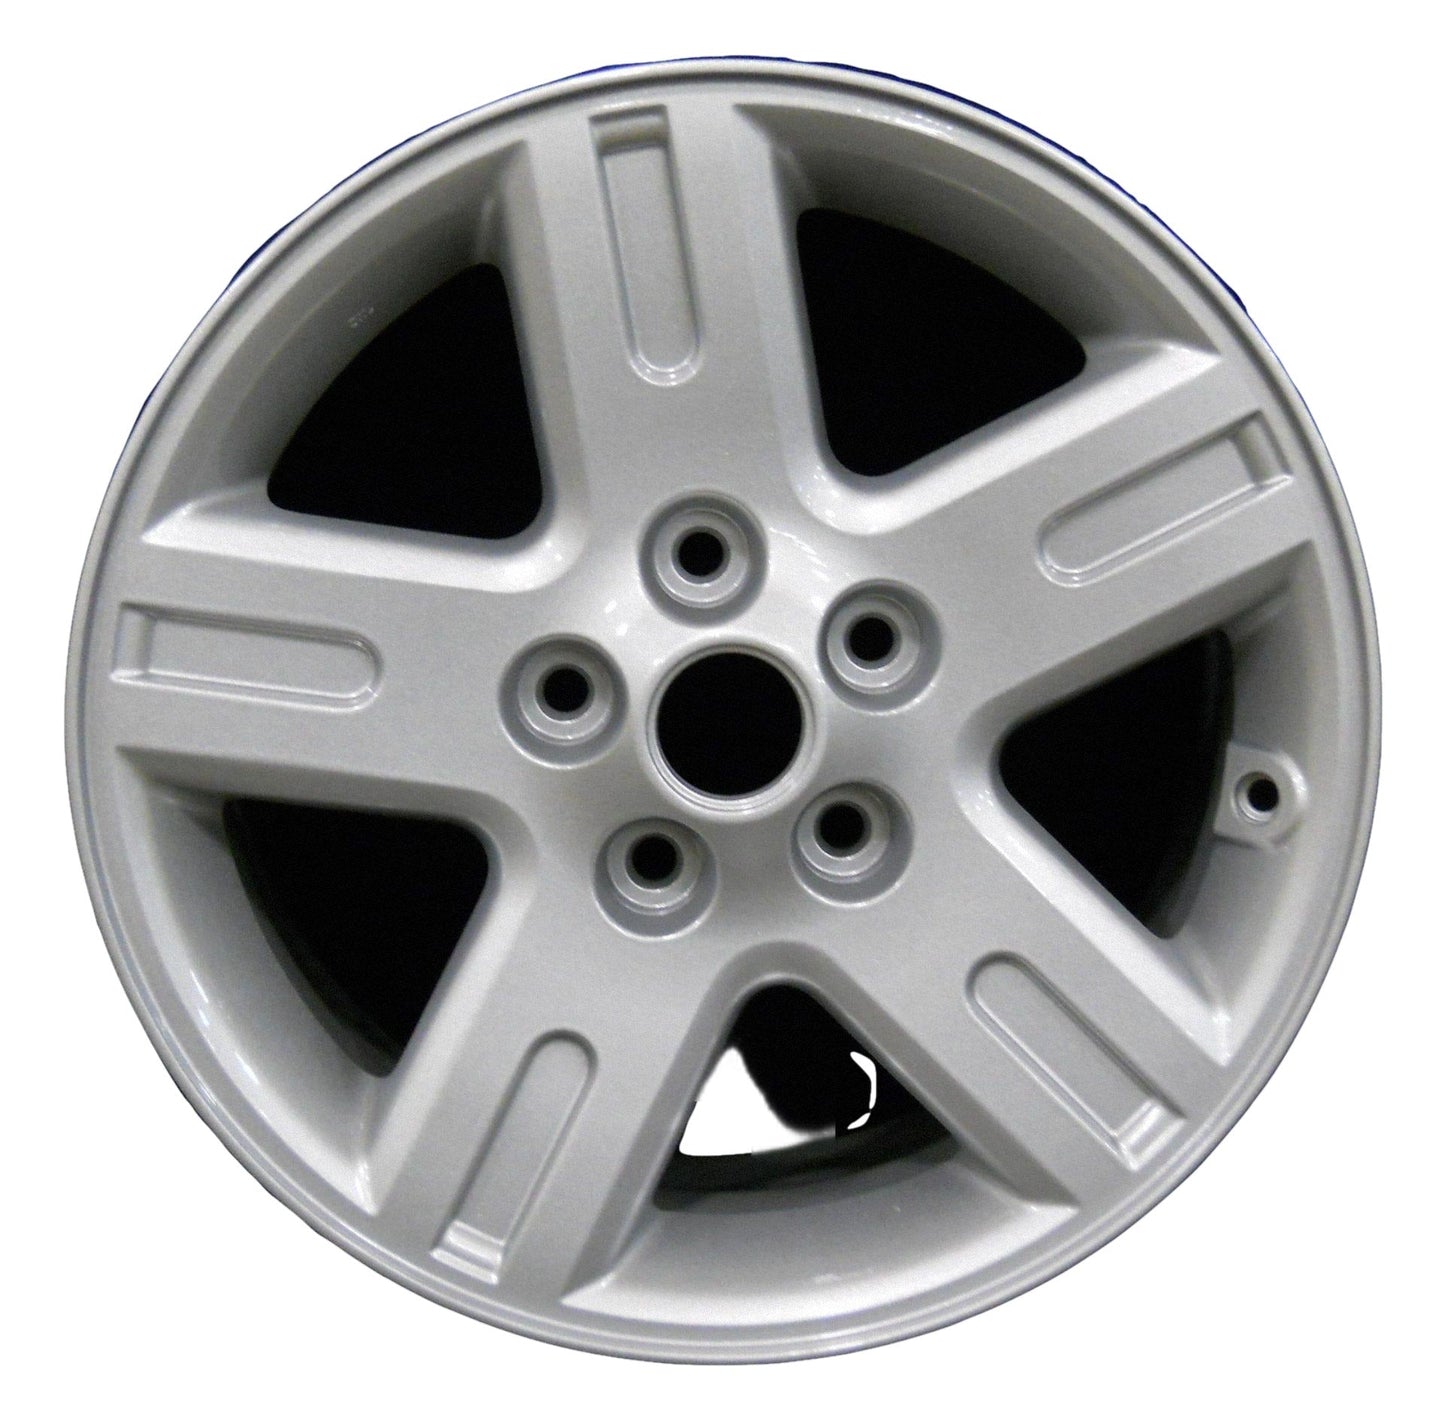 Ford Escape  2005, 2006, 2007, 2008, 2009, 2010, 2011, 2012 Factory OEM Car Wheel Size 16x7 Alloy WAO.3575.PS01.FF